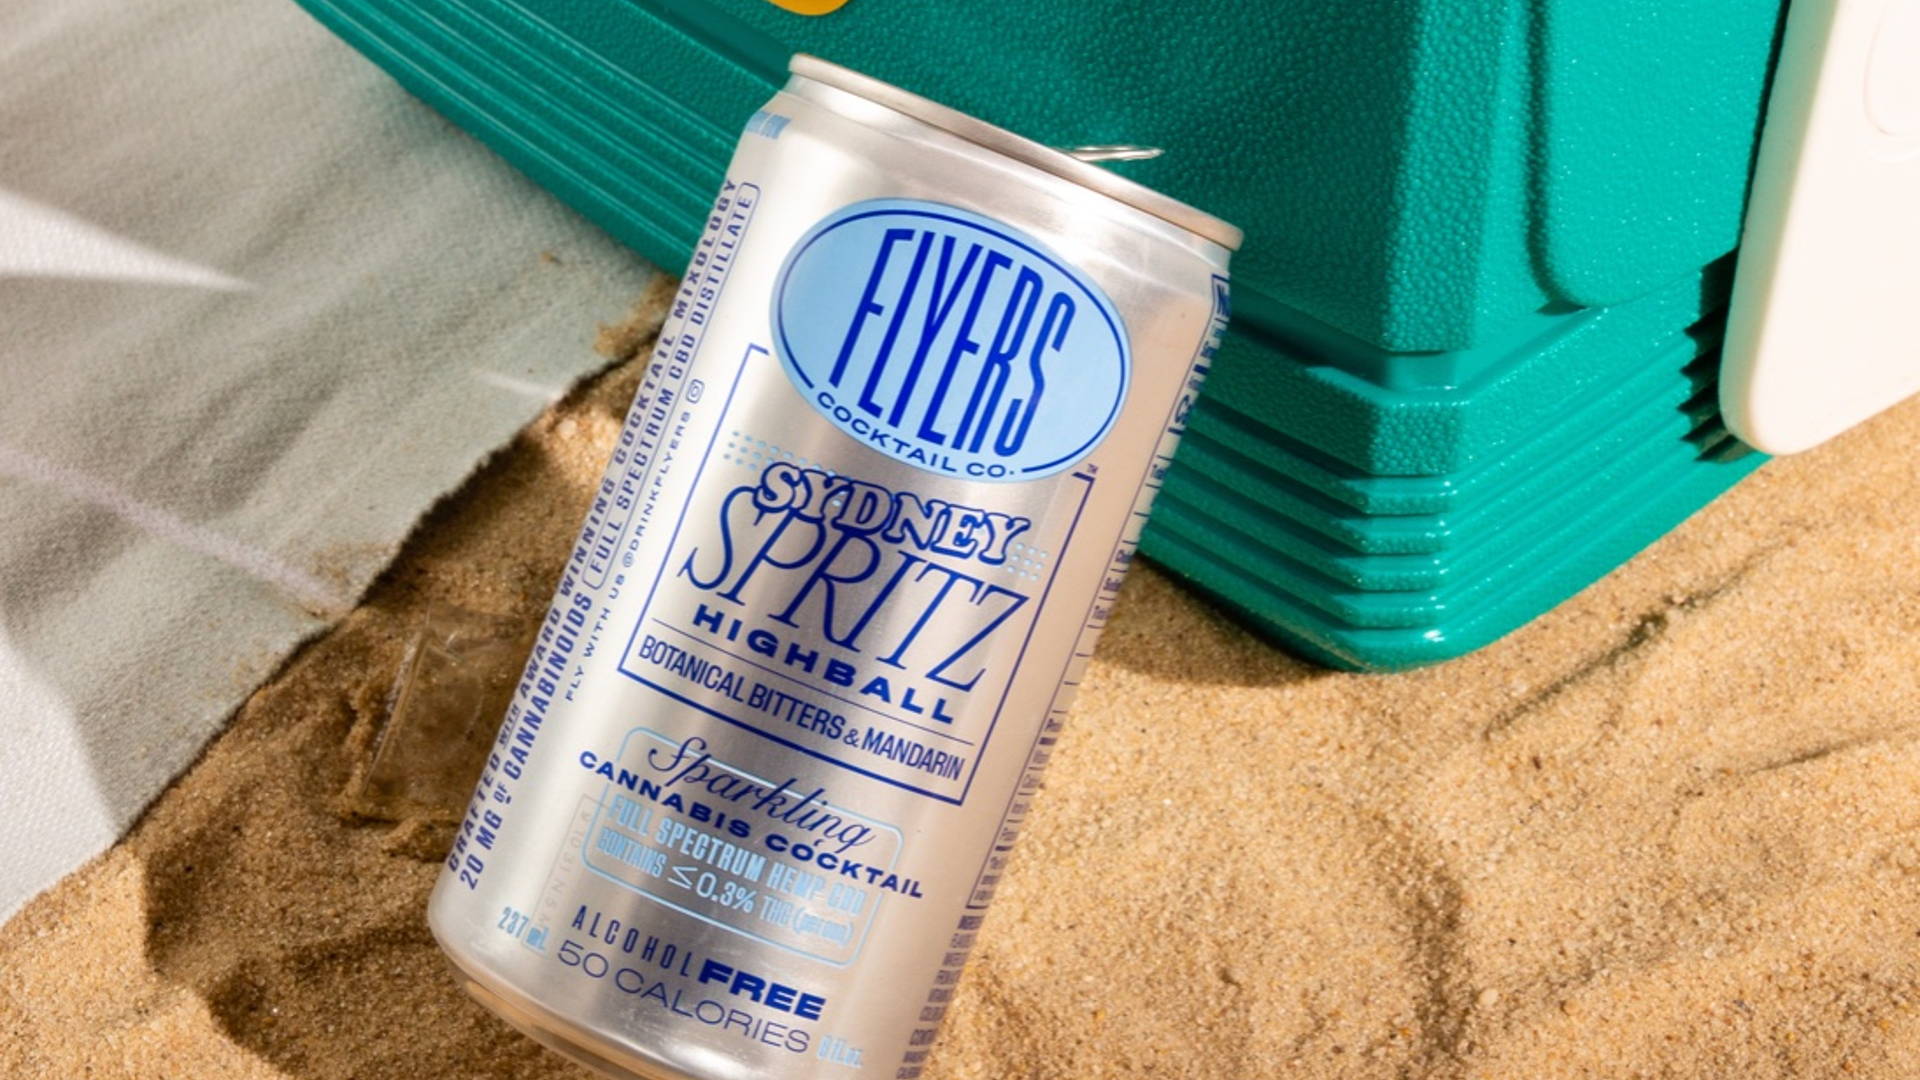 Featured image for Non-Alcoholic Flyers Cocktail Delivers Retro Typography On Its Aesthetically Pleasing Cans